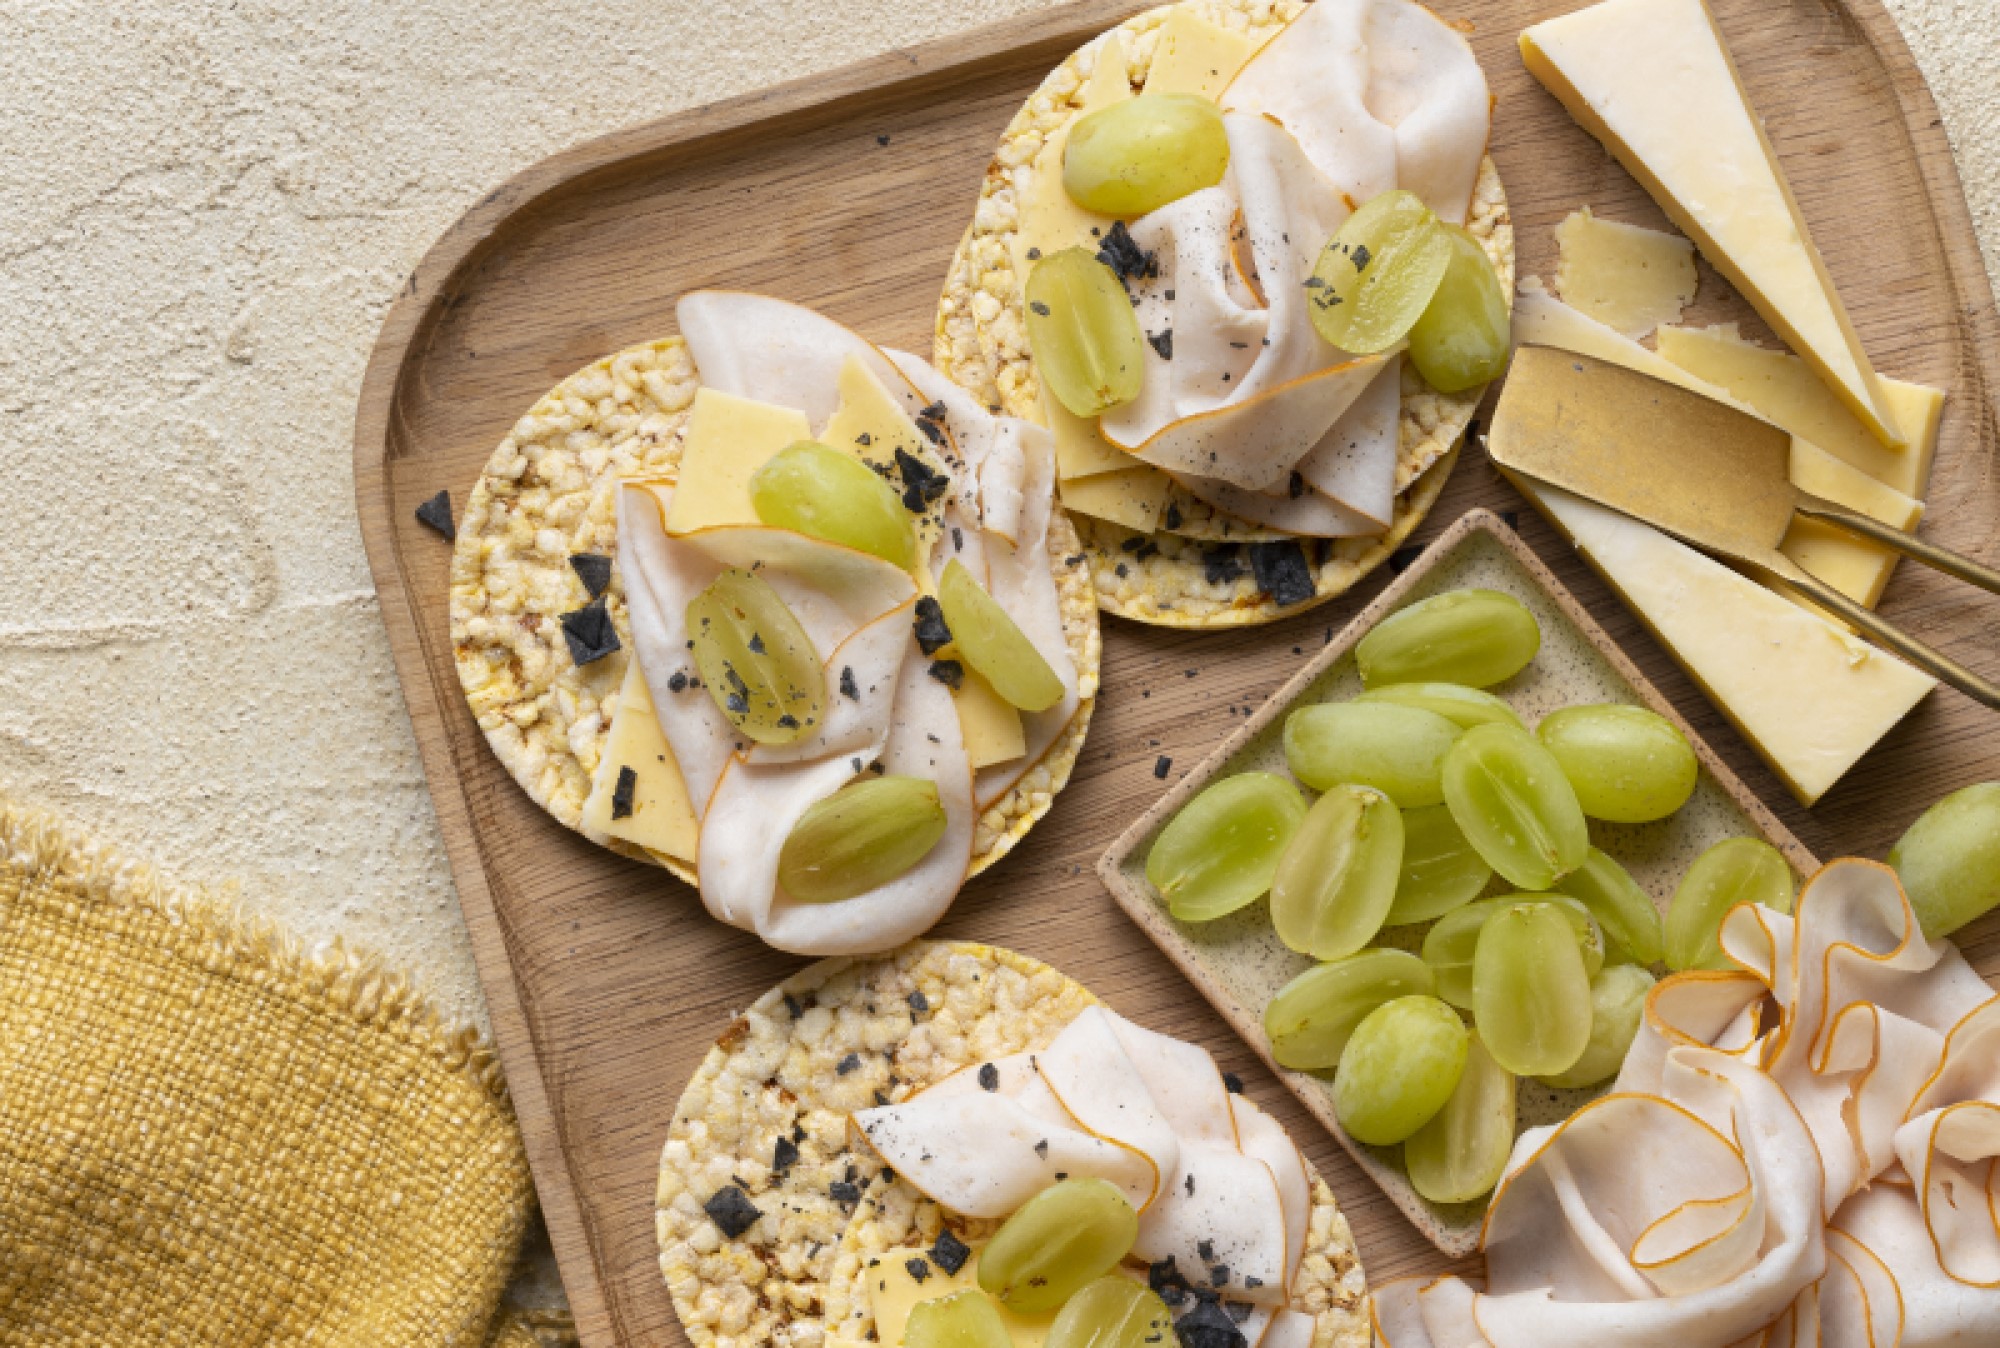 Mature Cheddar, Turkey & Grapes on Corn Thins slices